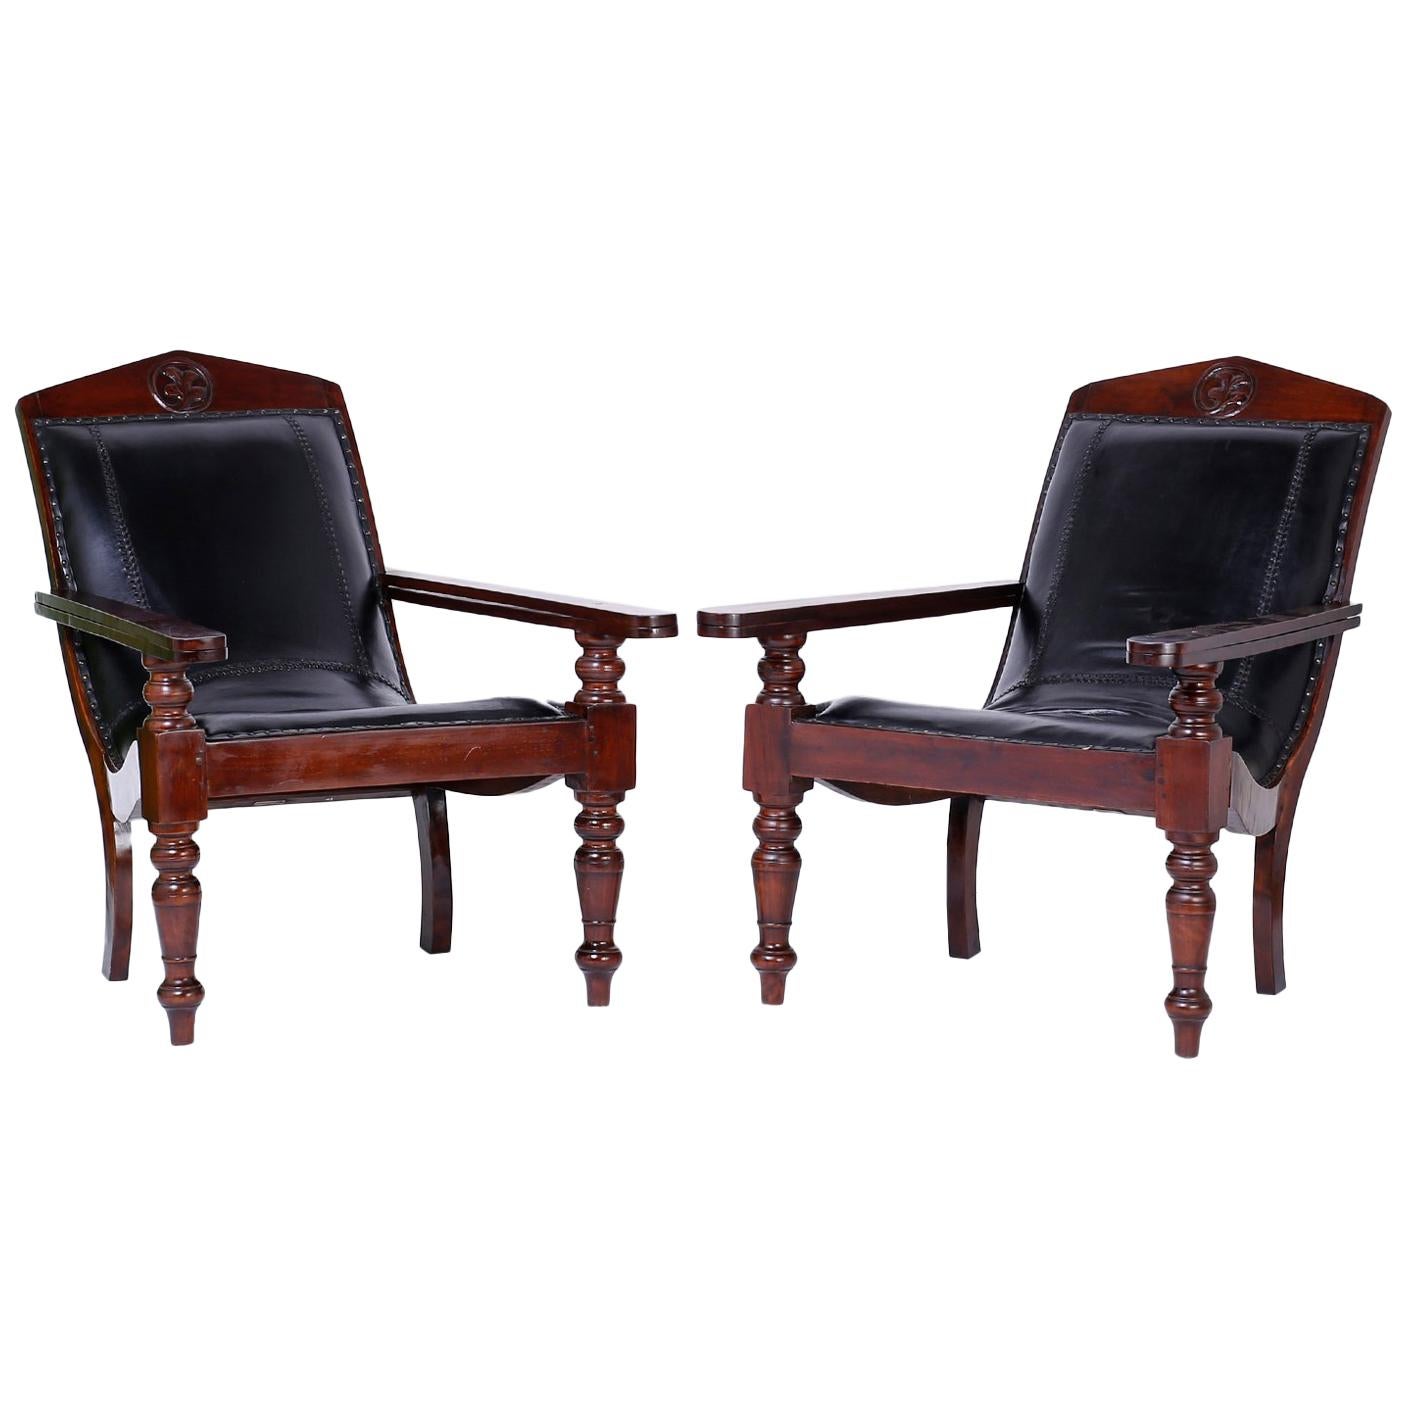 Pair of British Colonial Leather Plantation Chairs